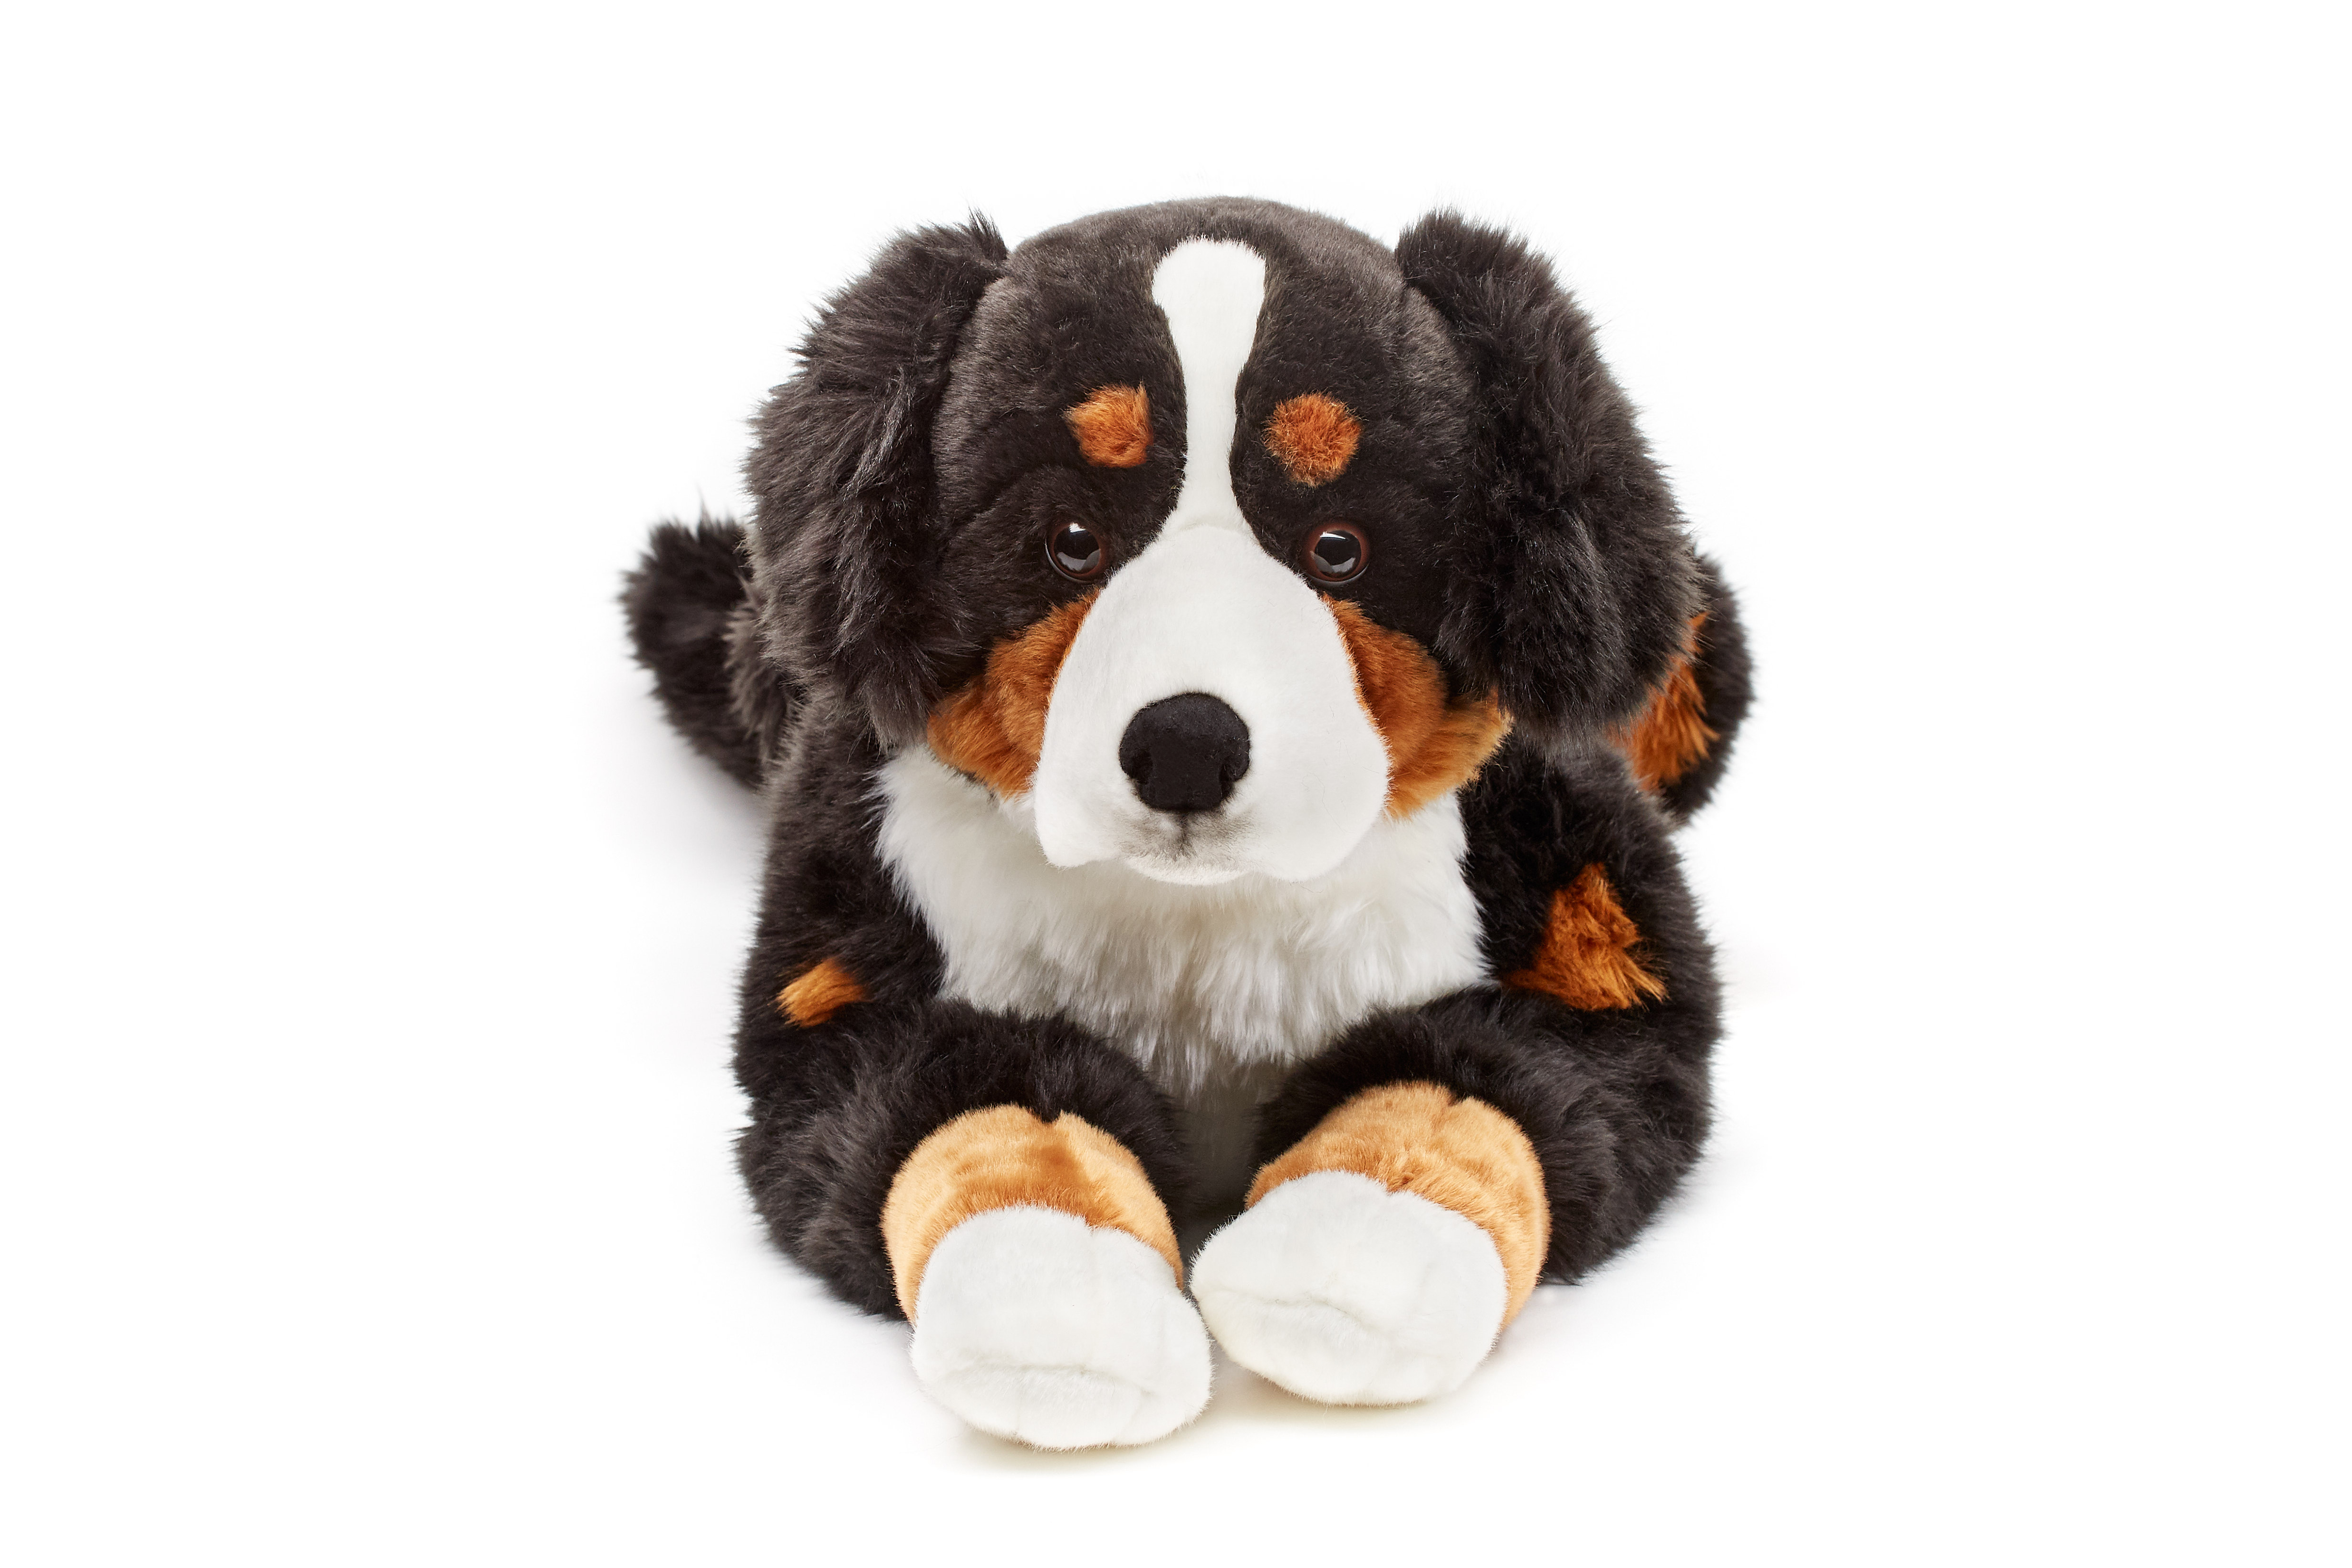 BERNESE MOUNTAIN DOG WITH LEAD 12" SOFT L62433R CUDDLY PLUSH SOFT TOY KOT 